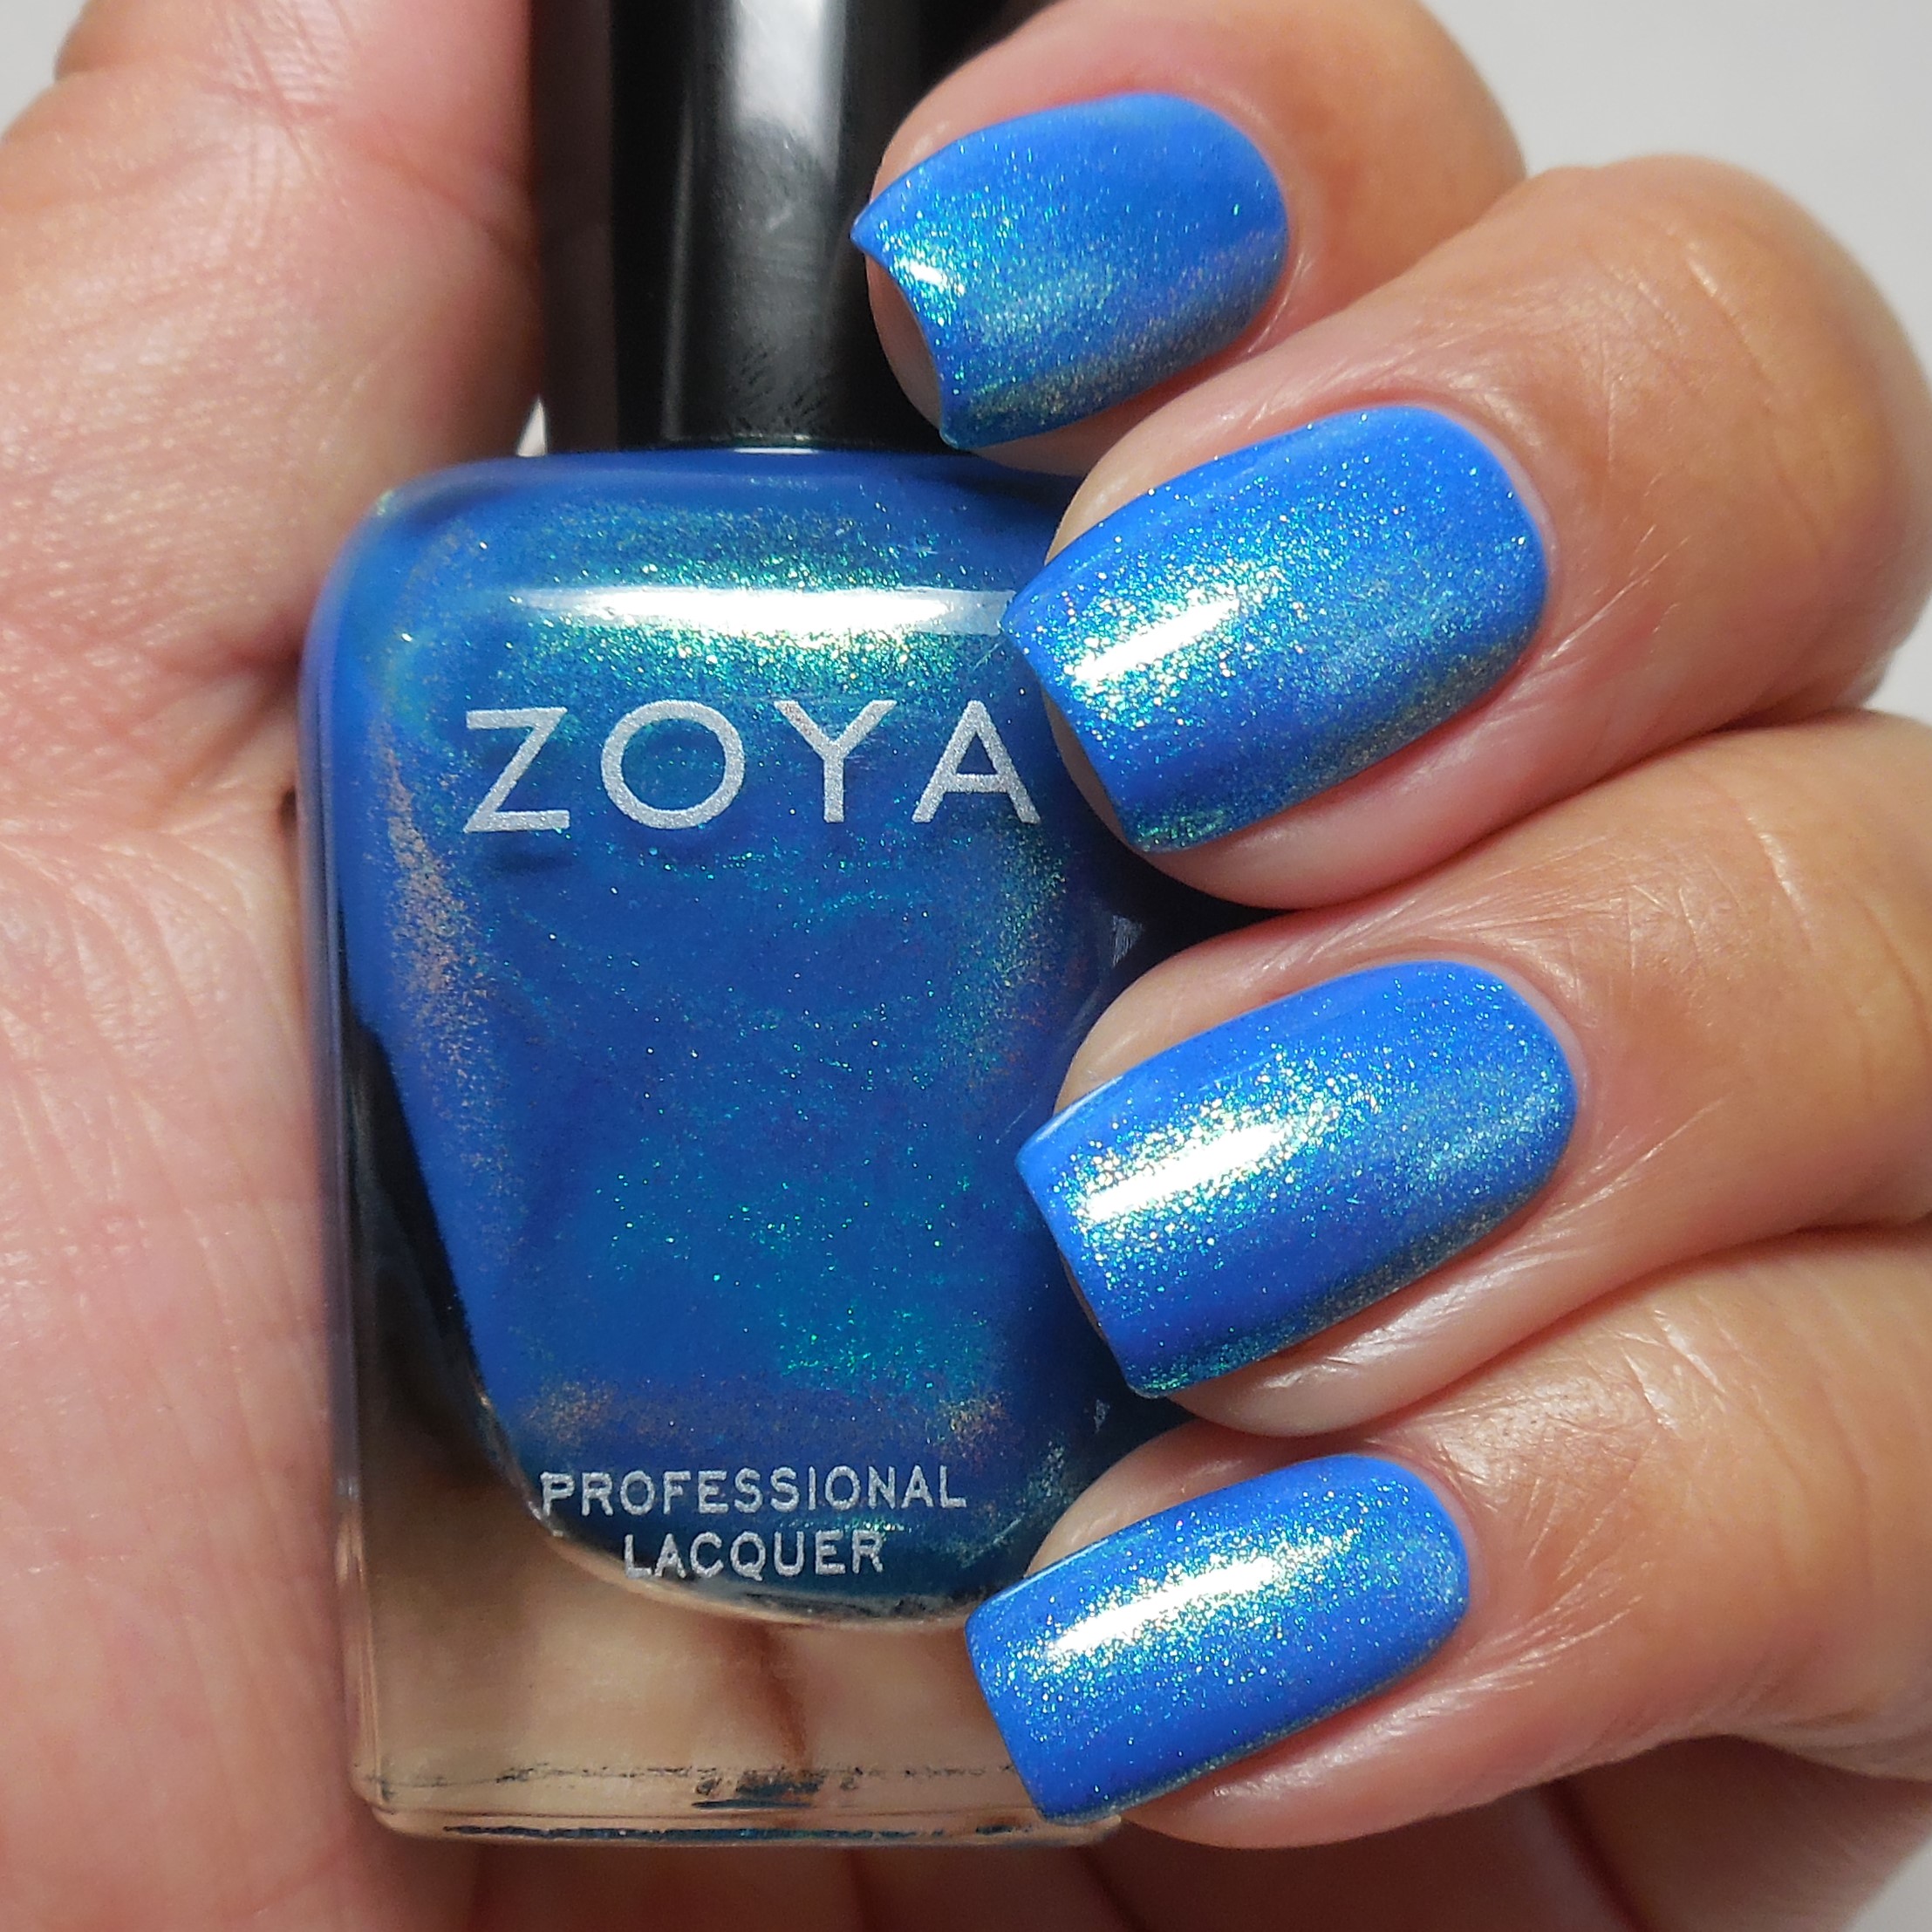 Zoya Summer 1 Of Life and Lacquer